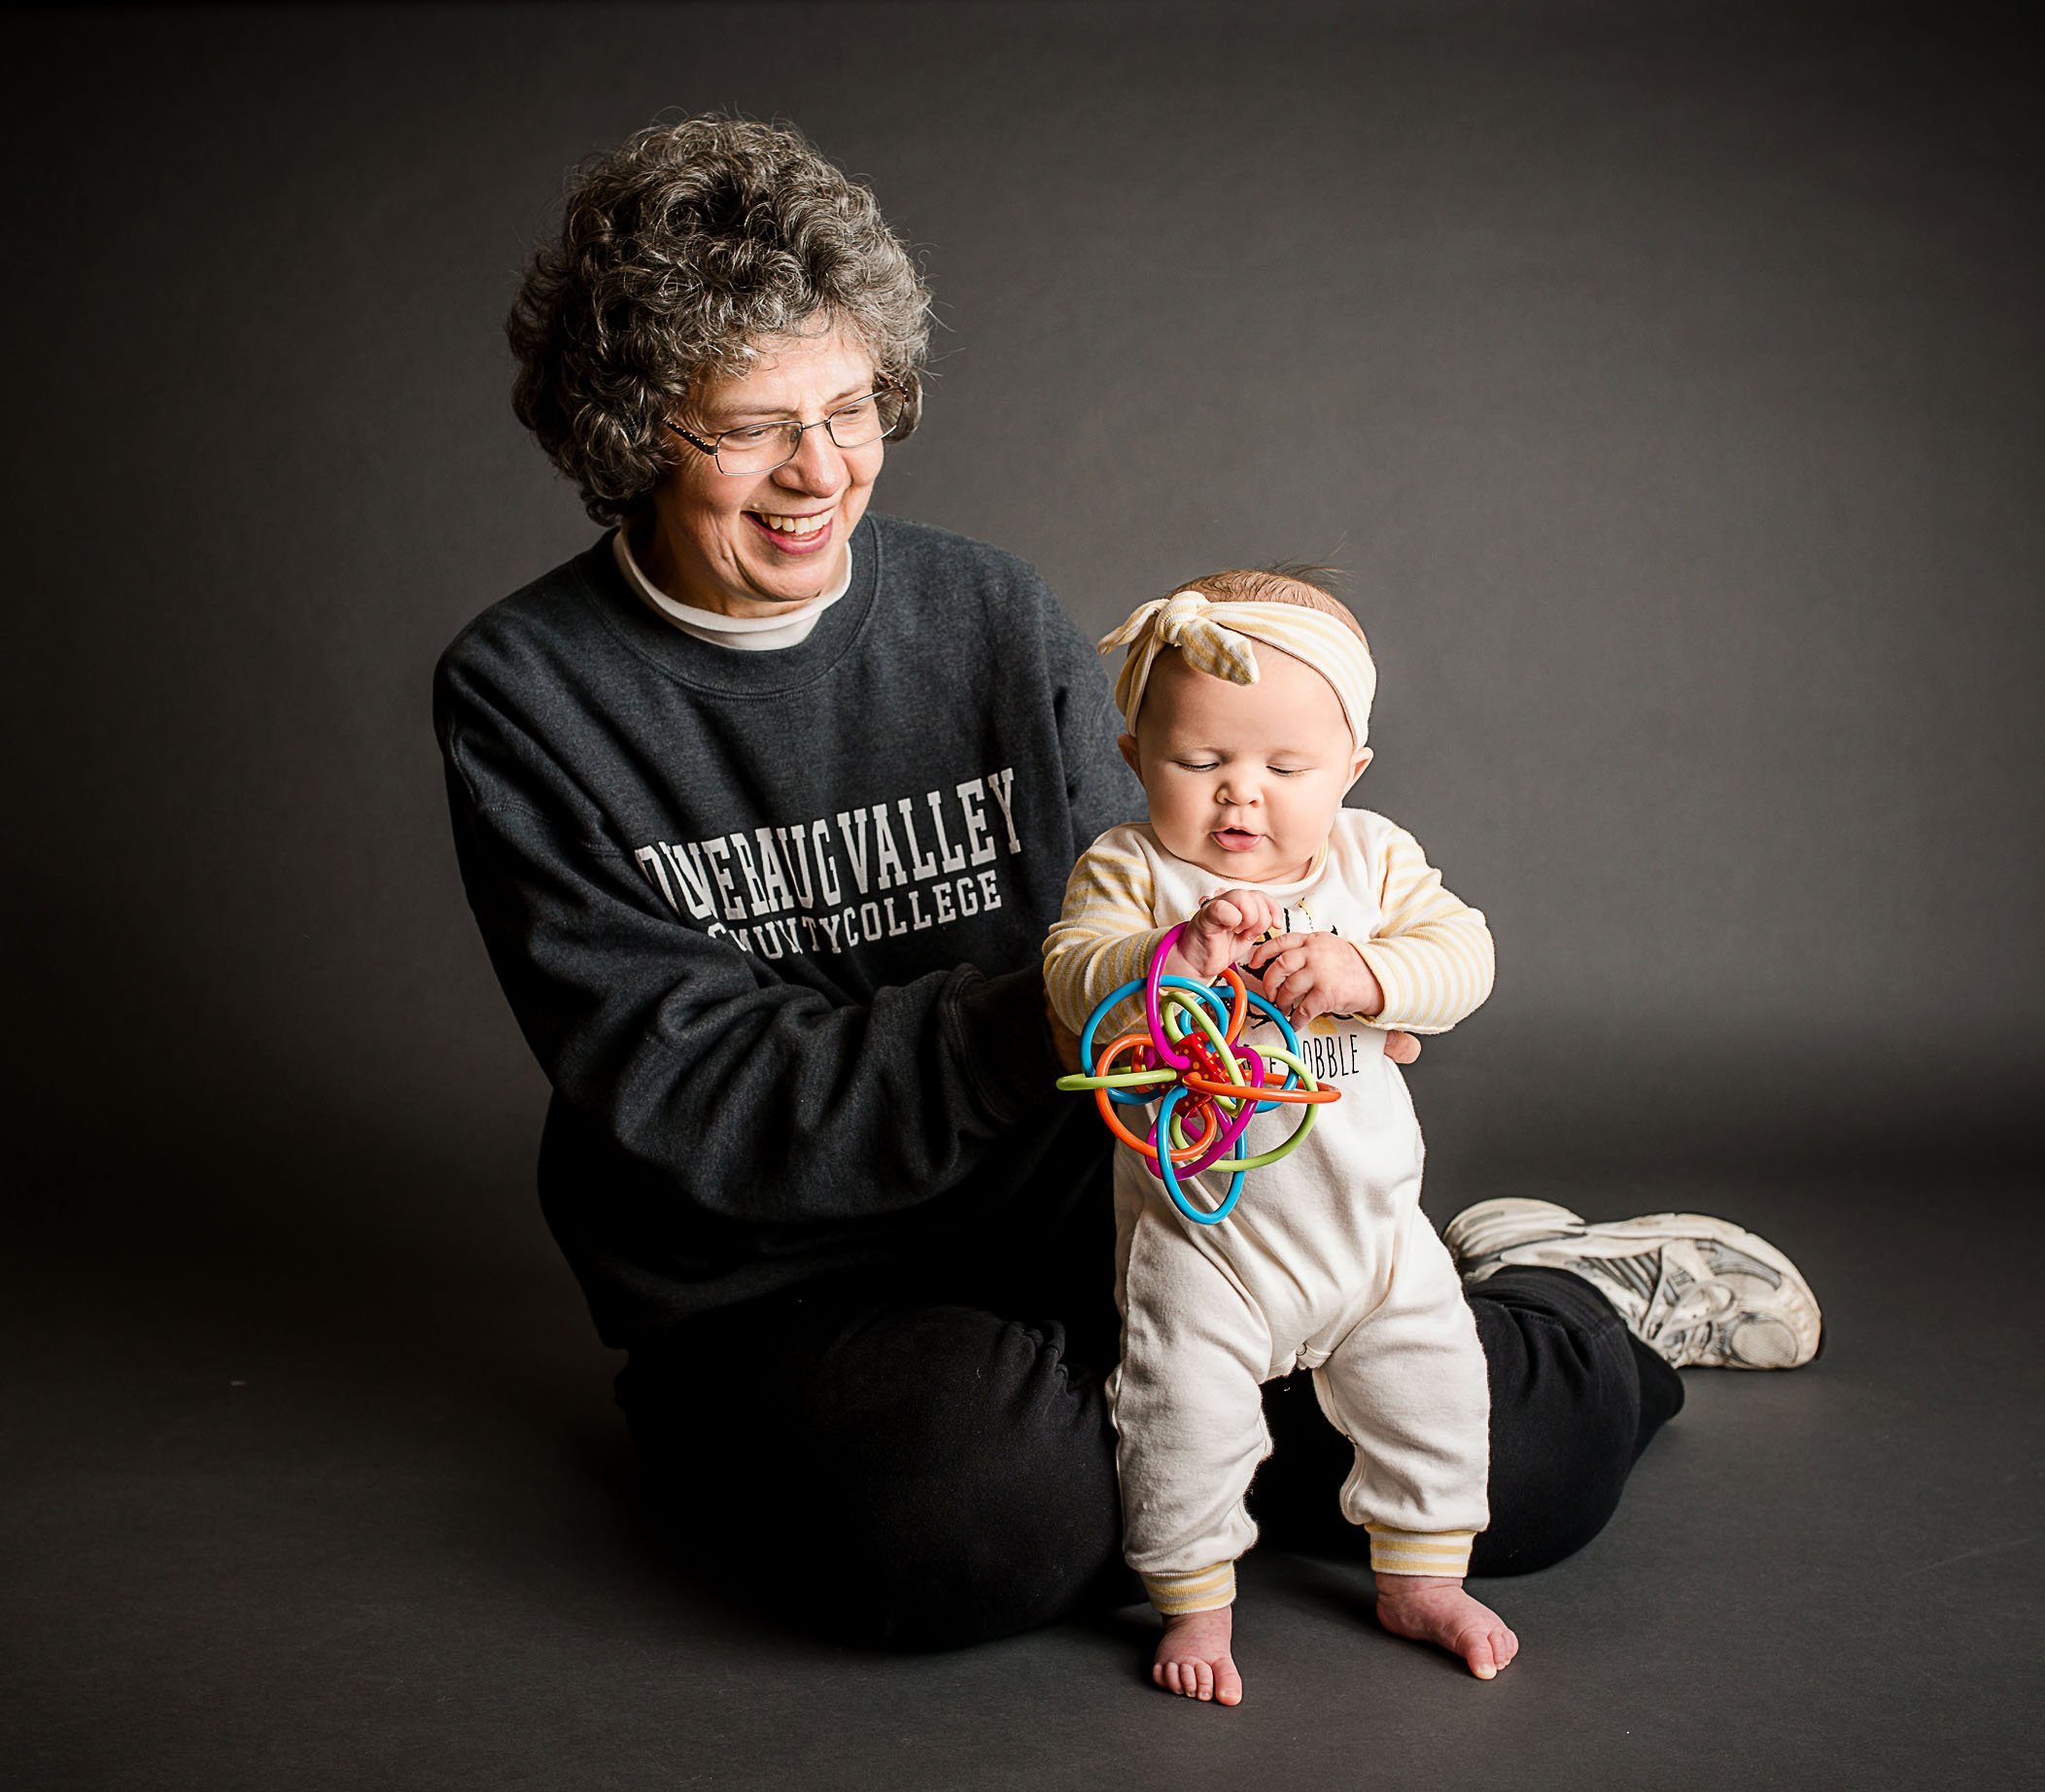 Grandma holding 6 mo old baby standing and playing with a toy One Big Happy Photo